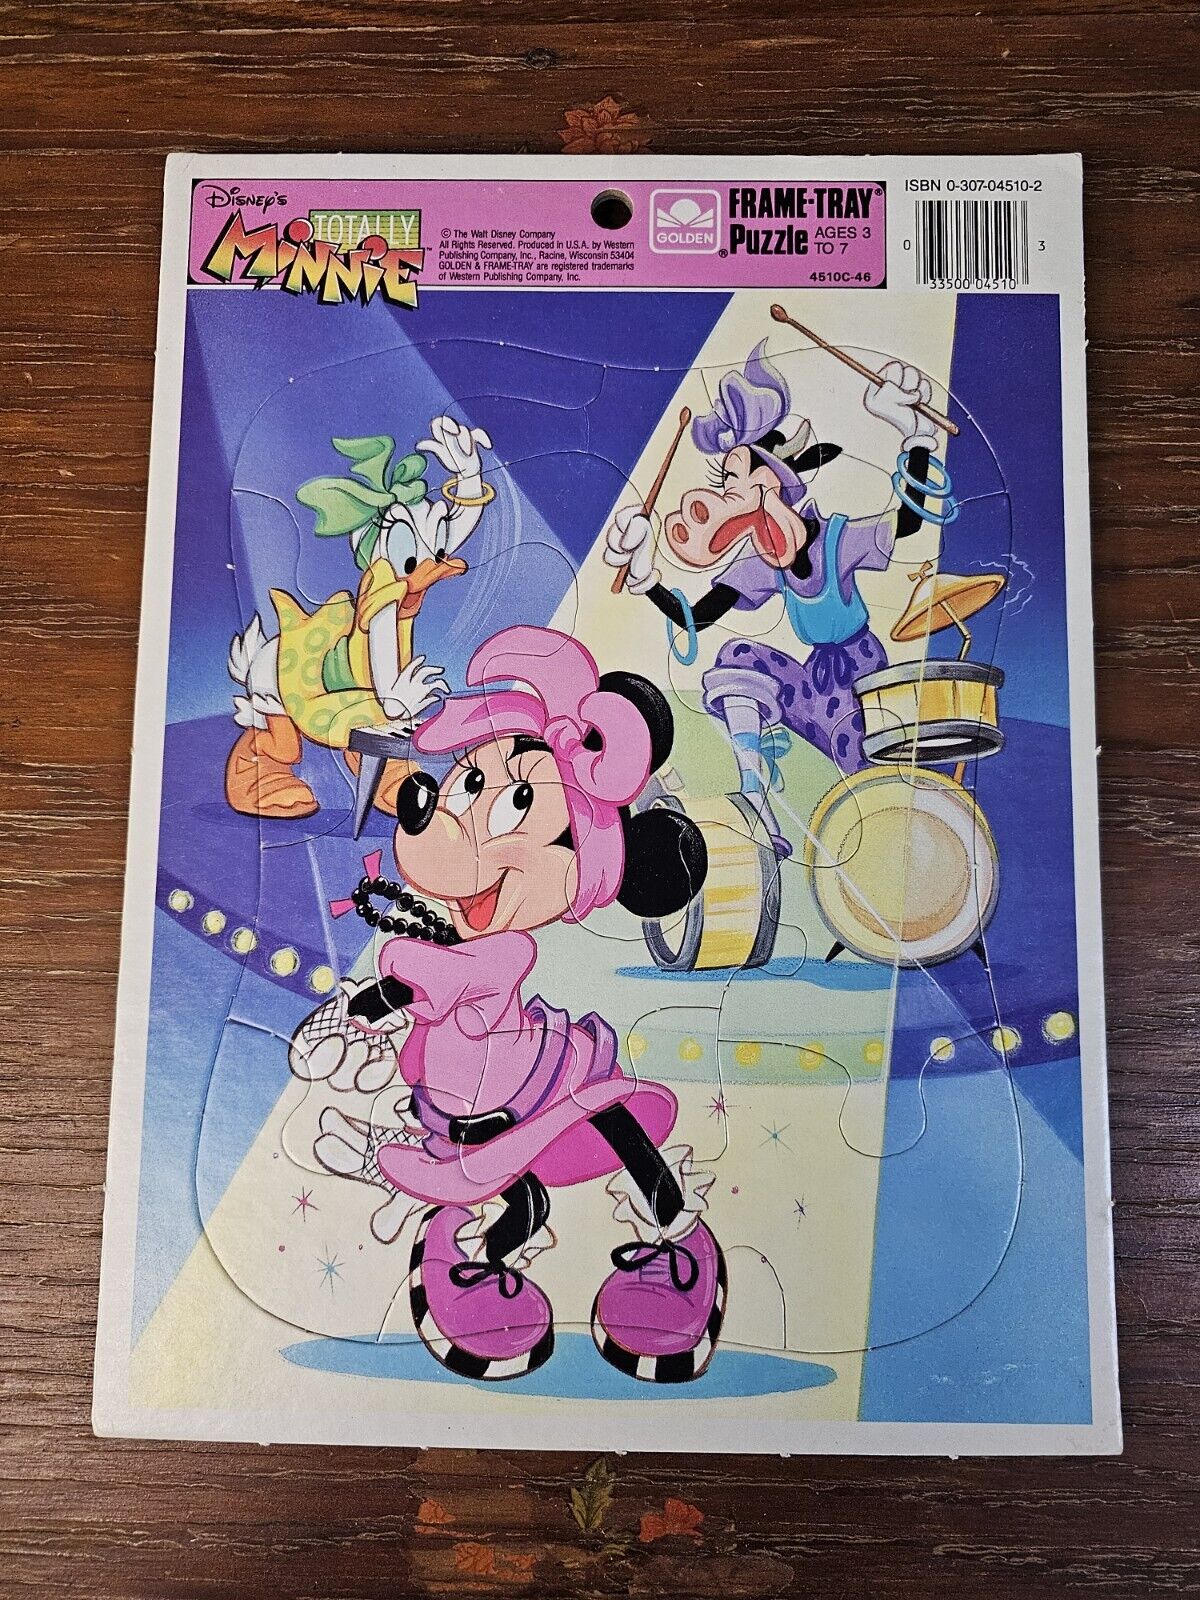 Vintage 1980s Disney’s Totally Minnie  Frame Tray Puzzle